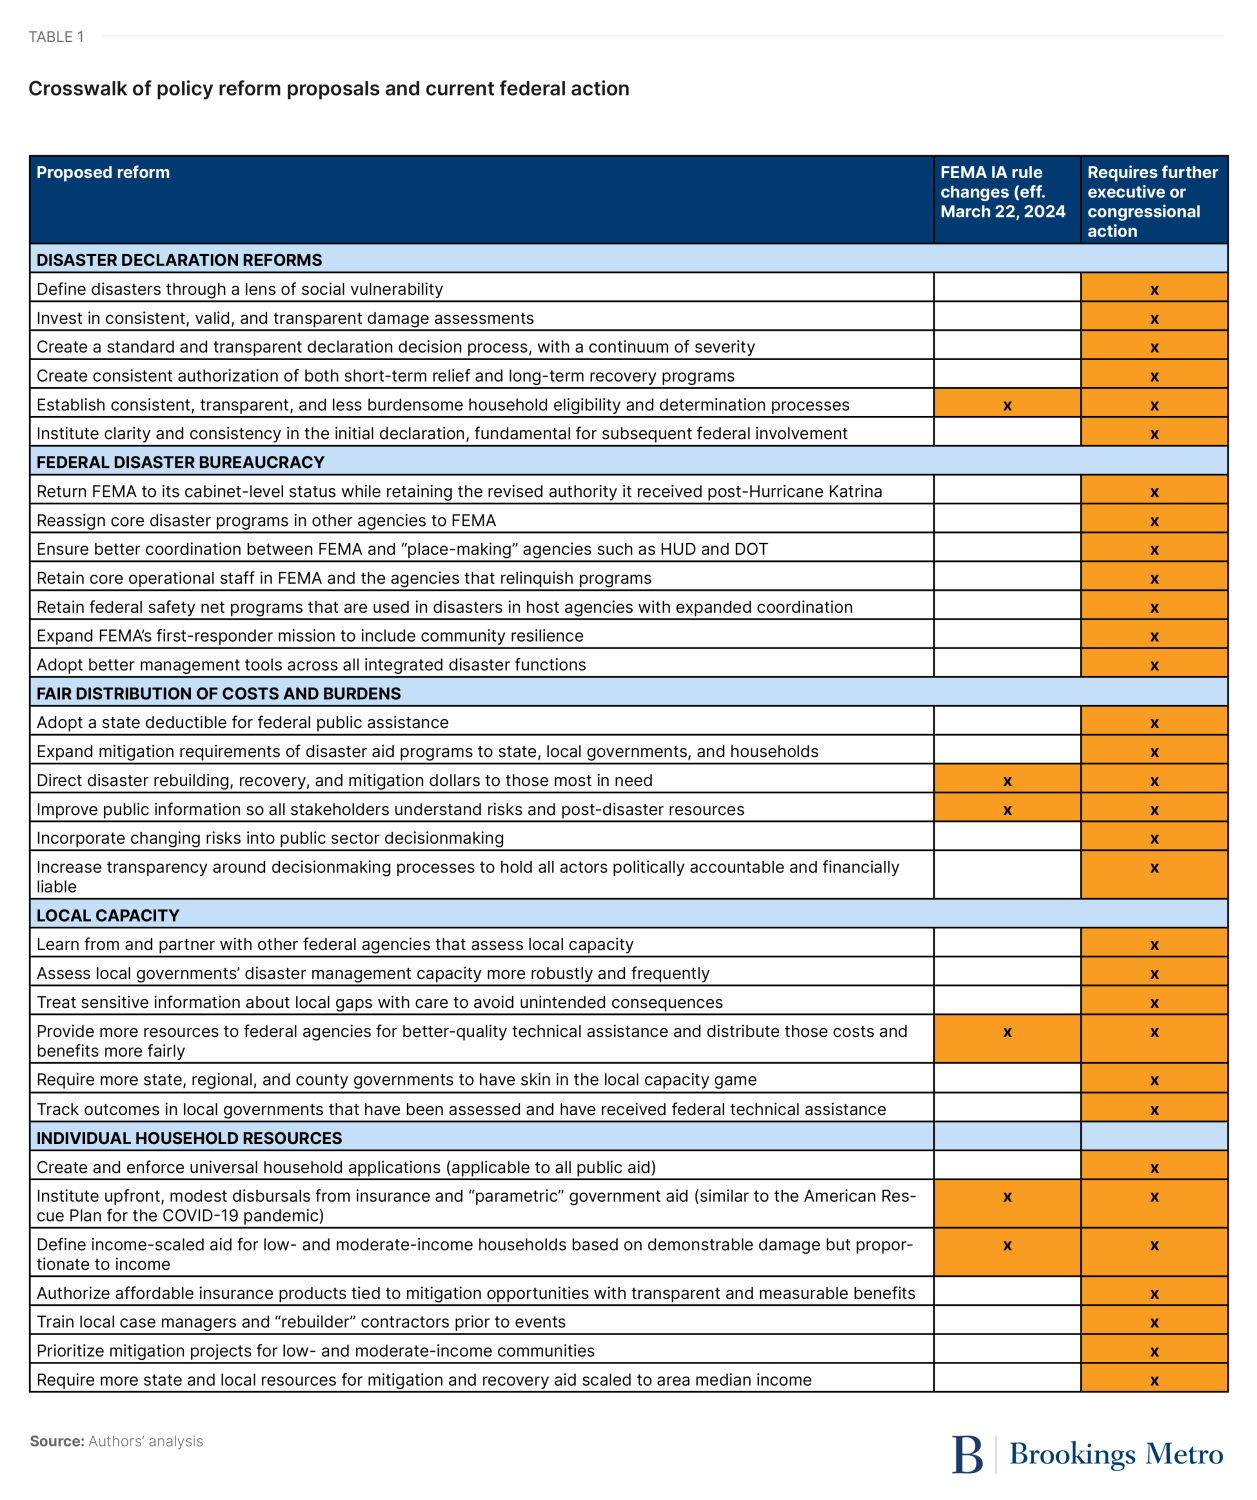 Table 1. Crosswalk of policy reform proposals and current federal action